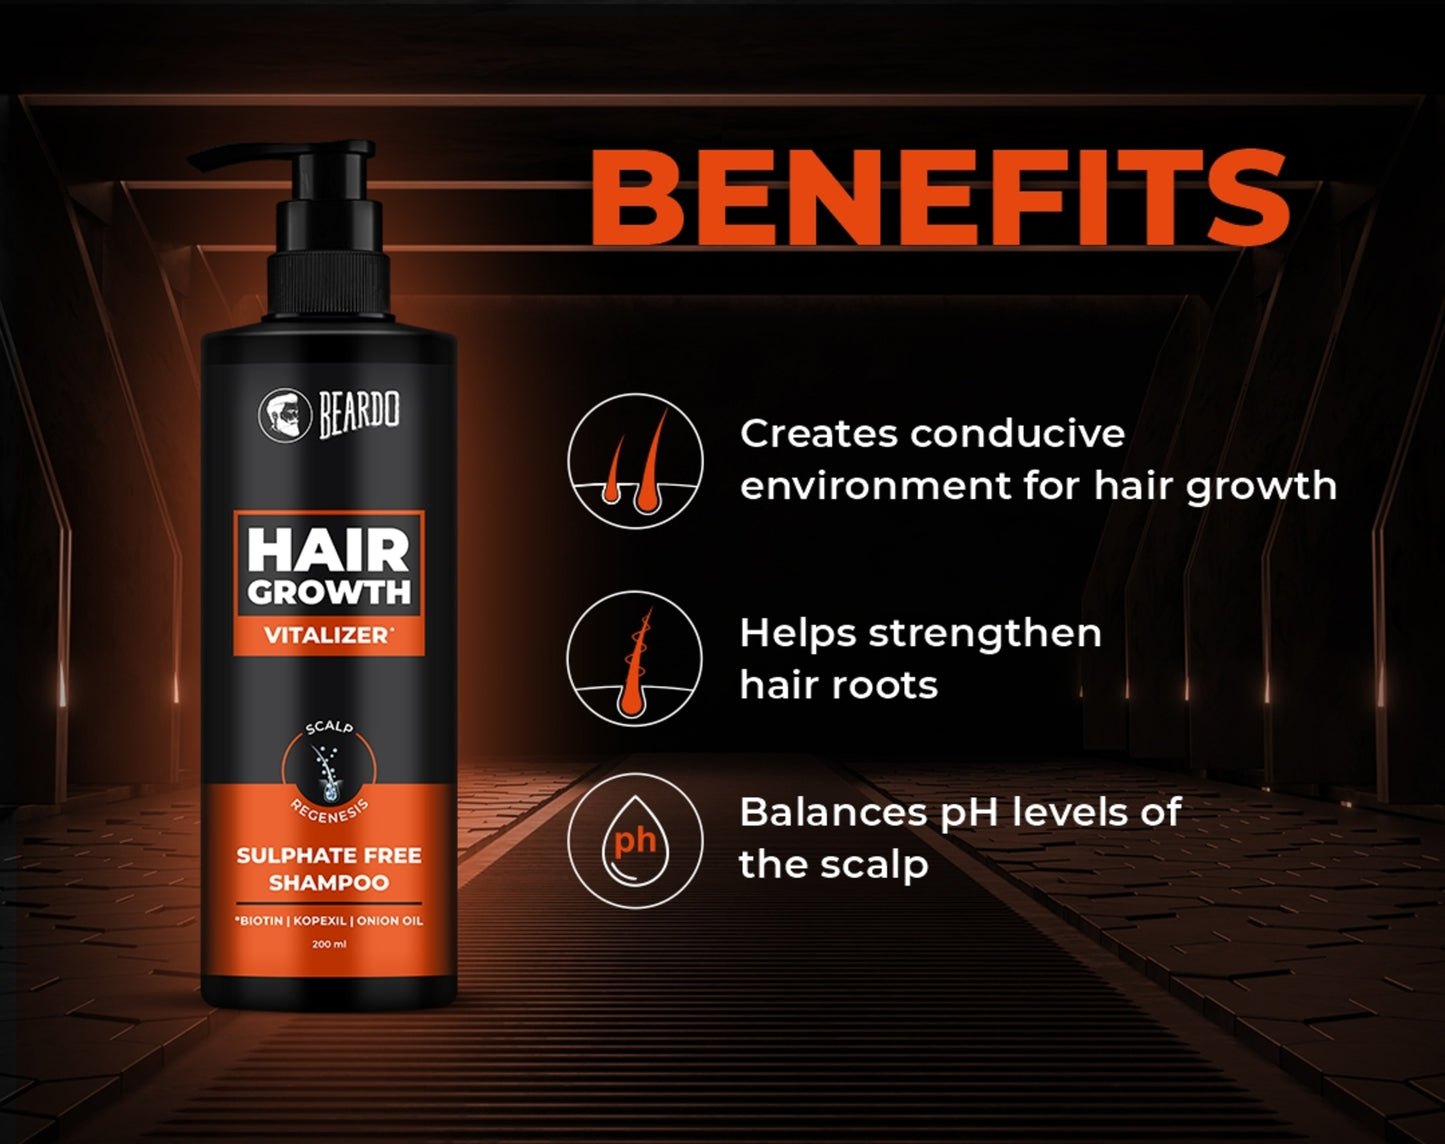 benefits of hair vitalizer, benefits of sulphate free shampoo